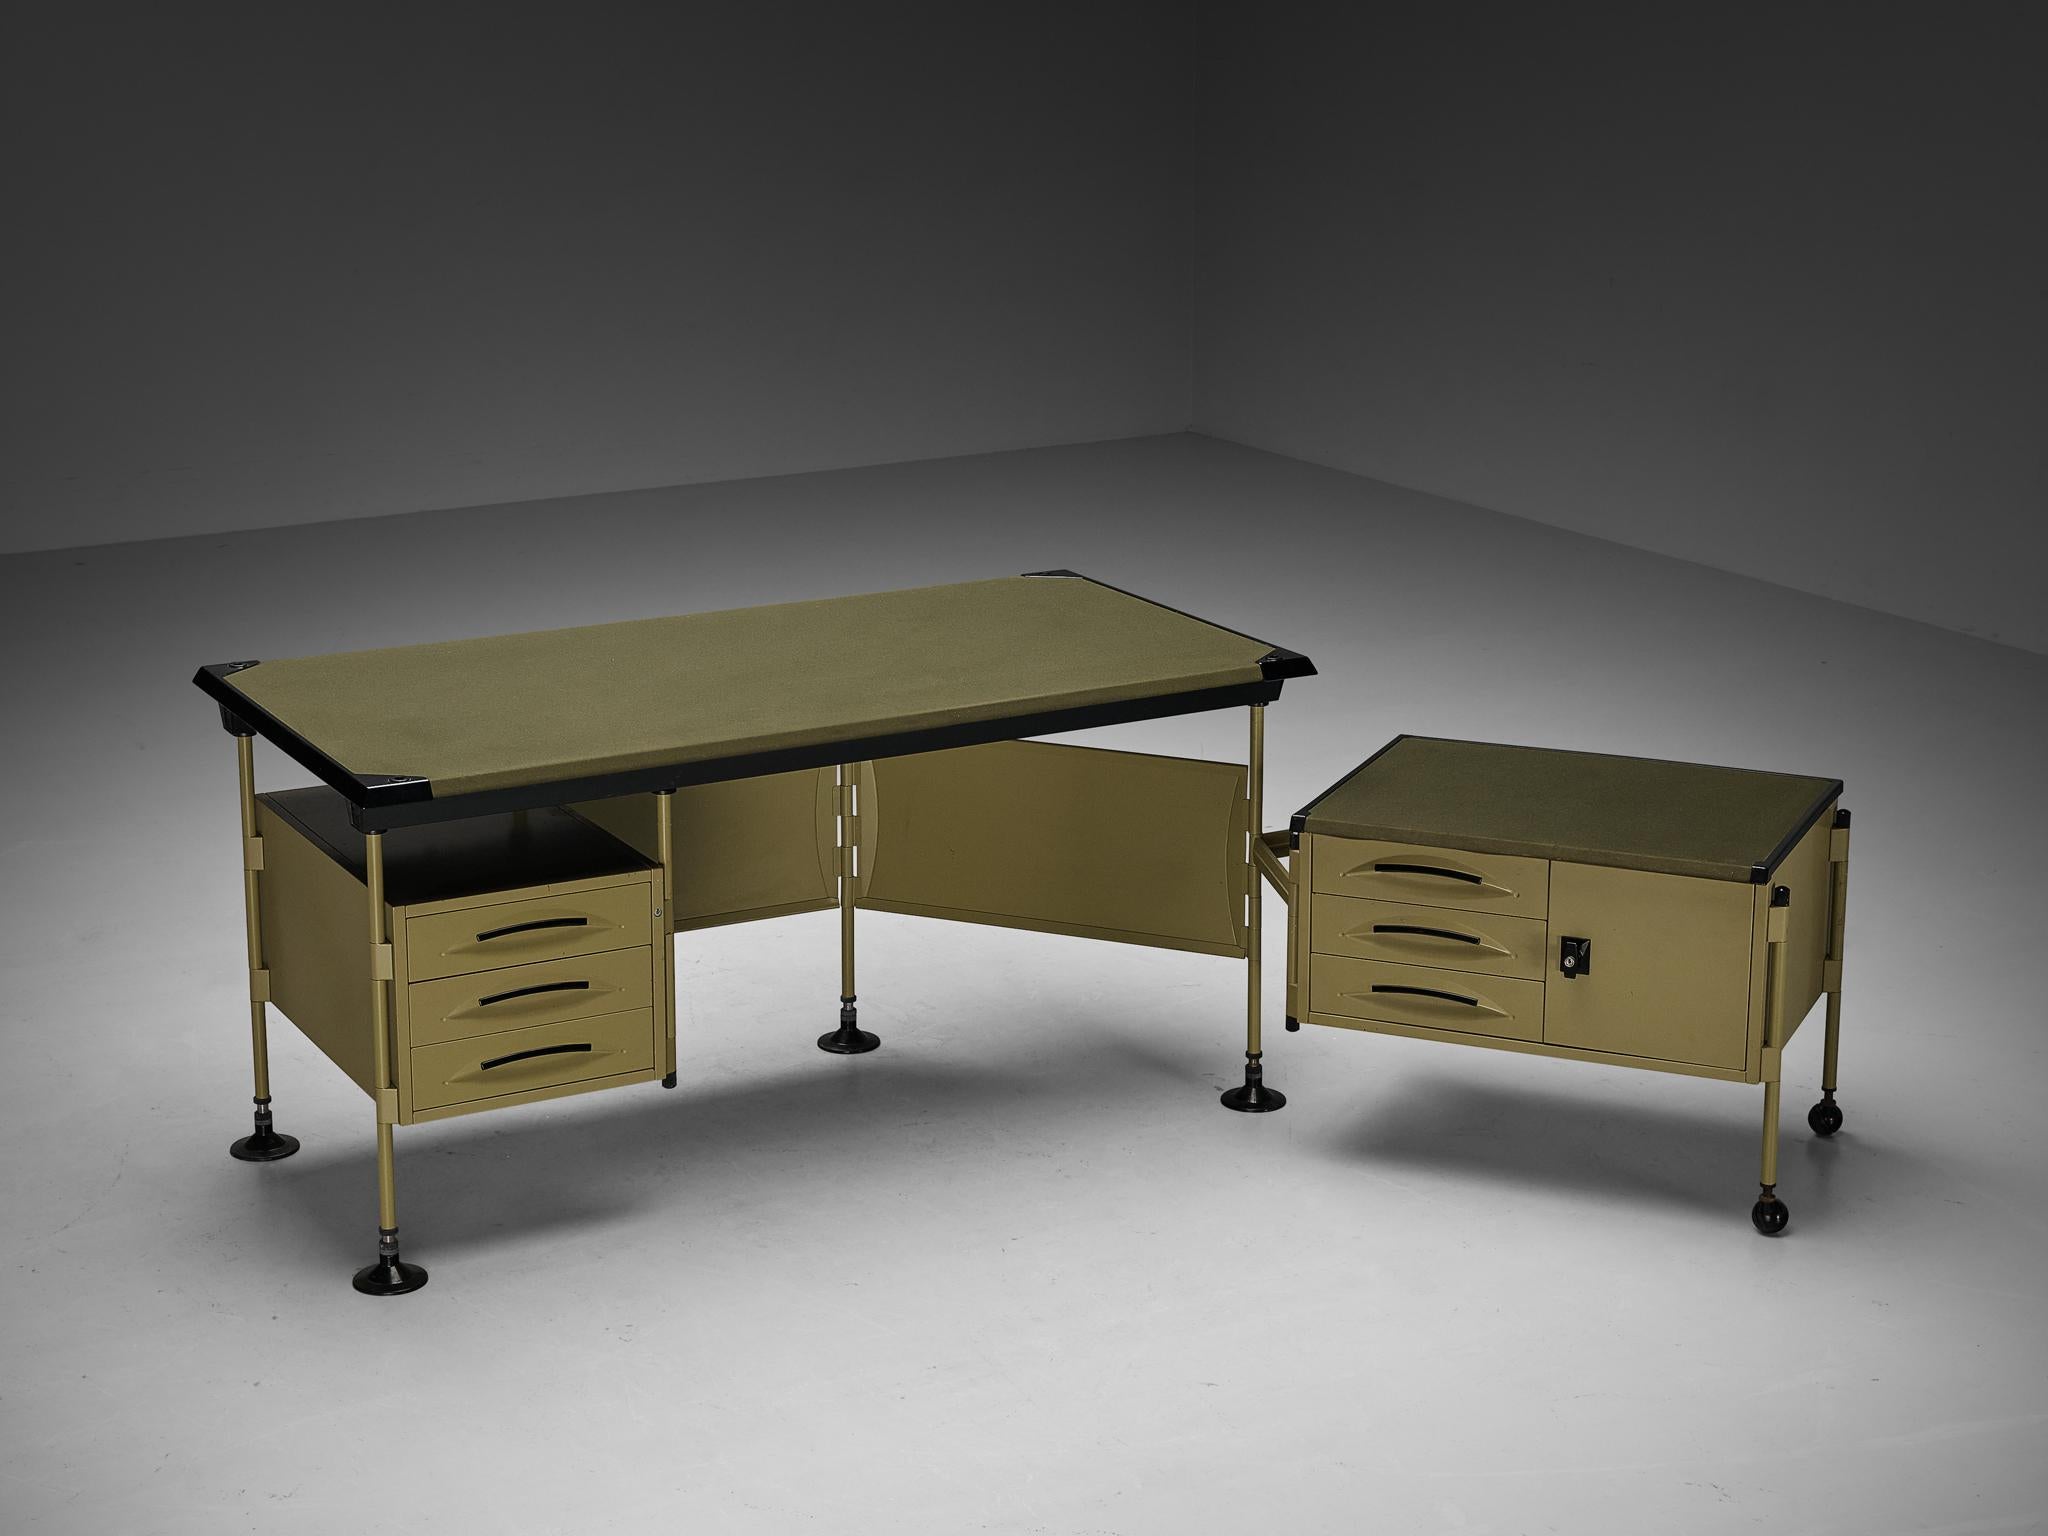 Studio BBPR for Olivetti, 'Spazio' writing desk with various storage compartments, coated steel, plastic, fabric, Italy, design 1959/60, production 1960s 

In 1954, Olivetti, the Italian office equipment manufacturer, hired BBPR to design their New